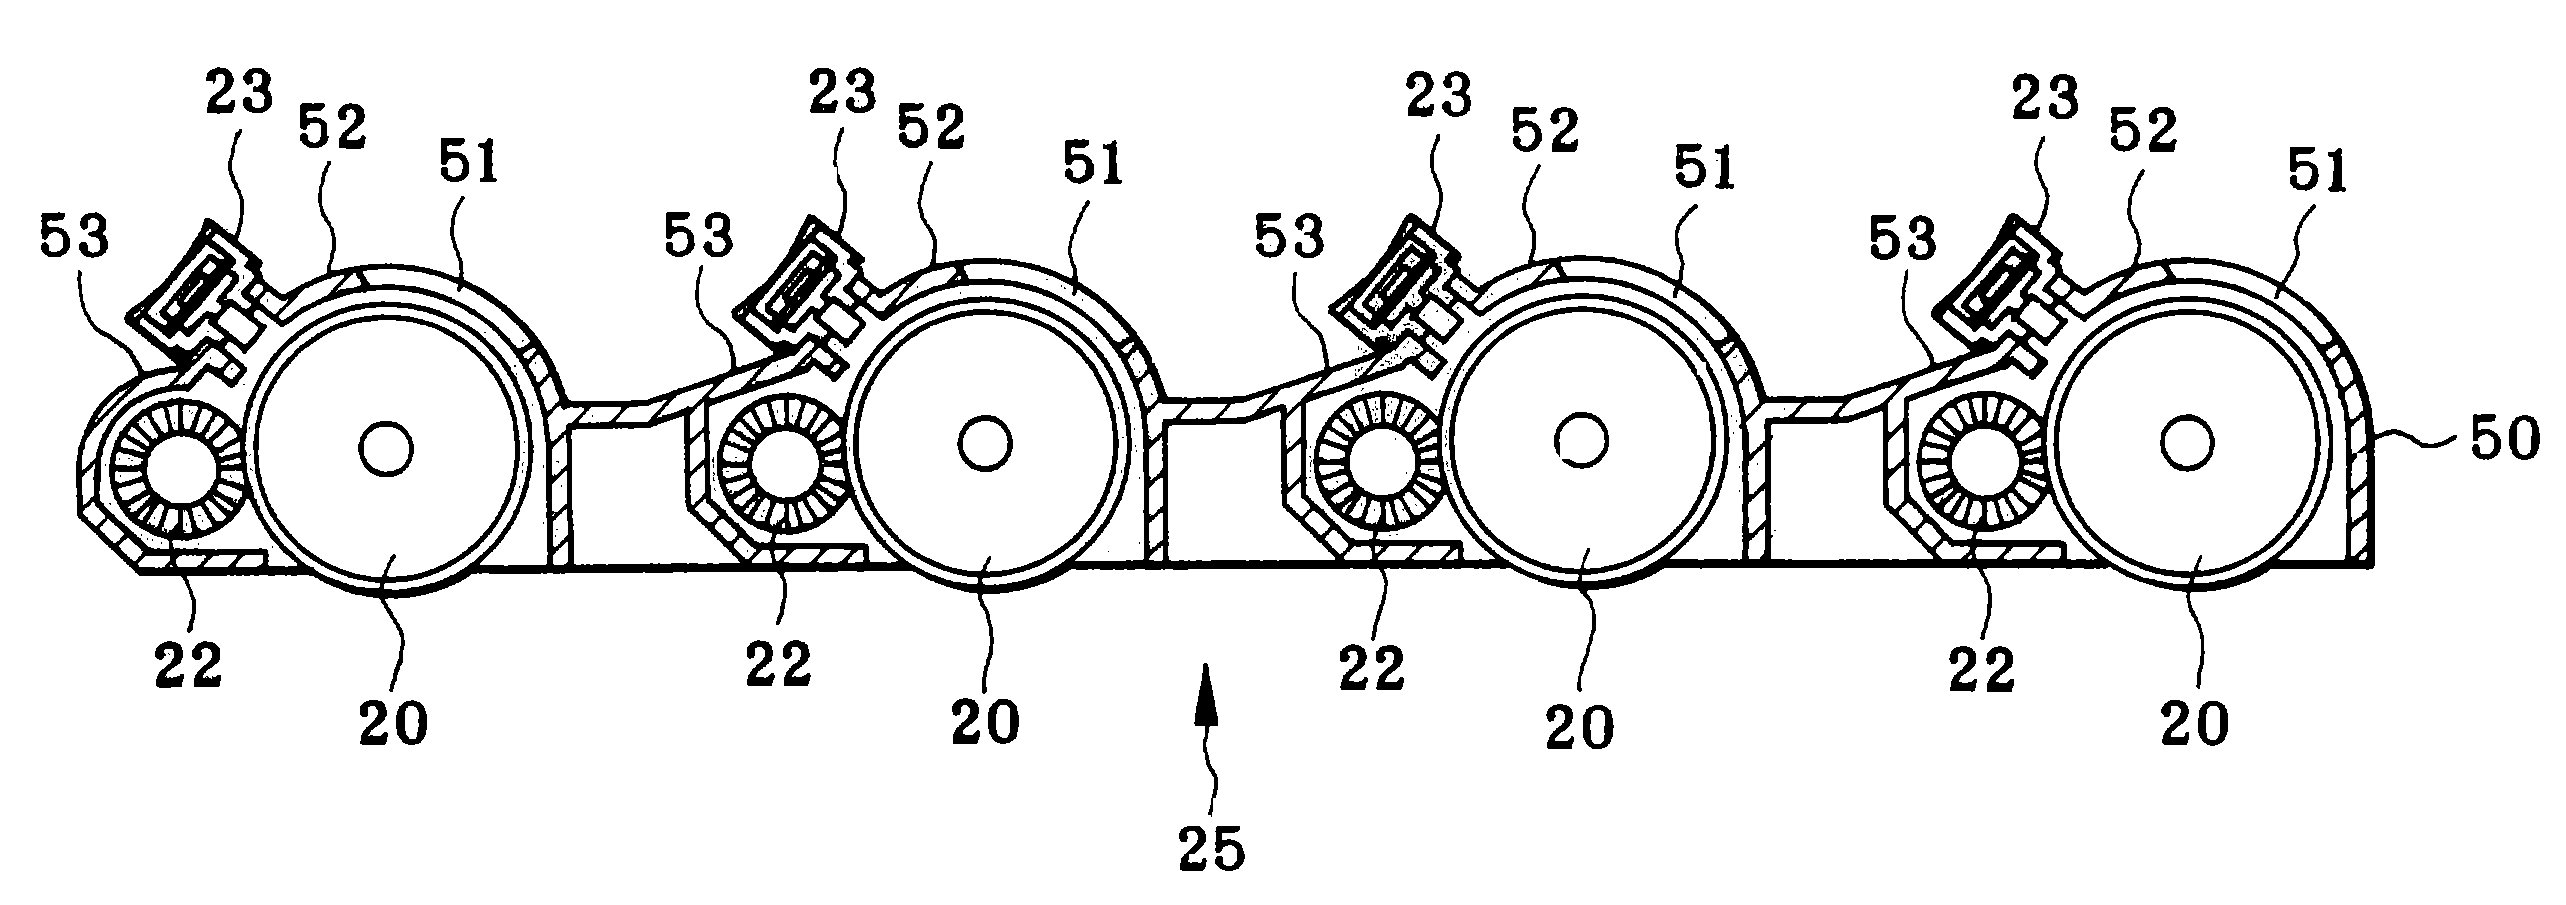 Image carrier cartridge, an exposure head shielded from light, and image forming apparatus using these